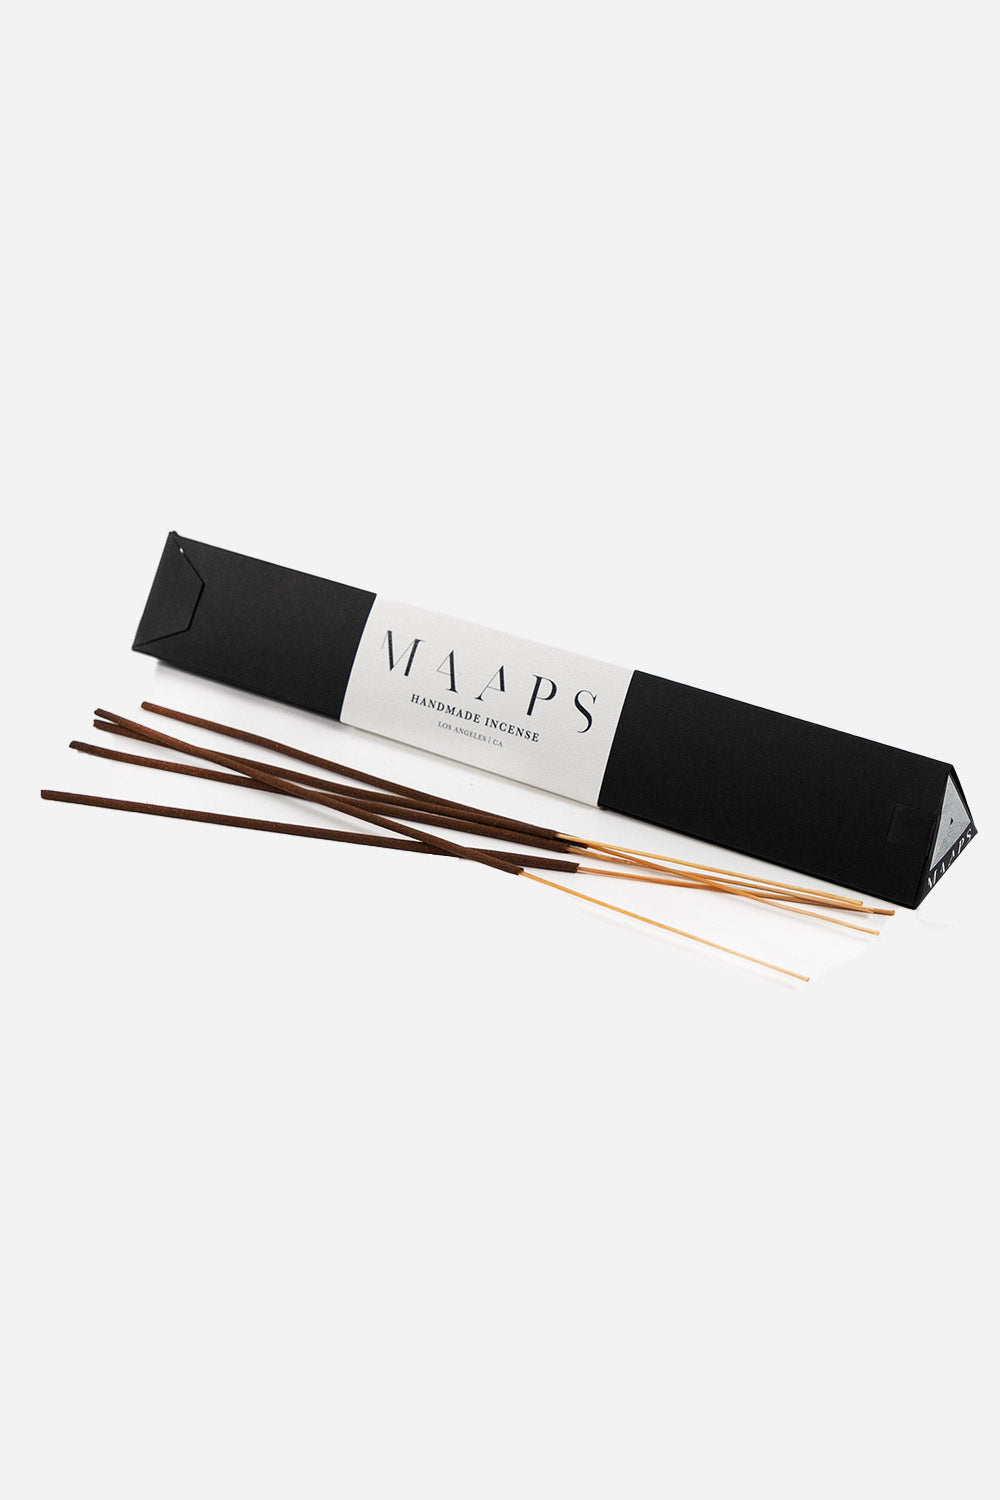 maaps incense made in LA